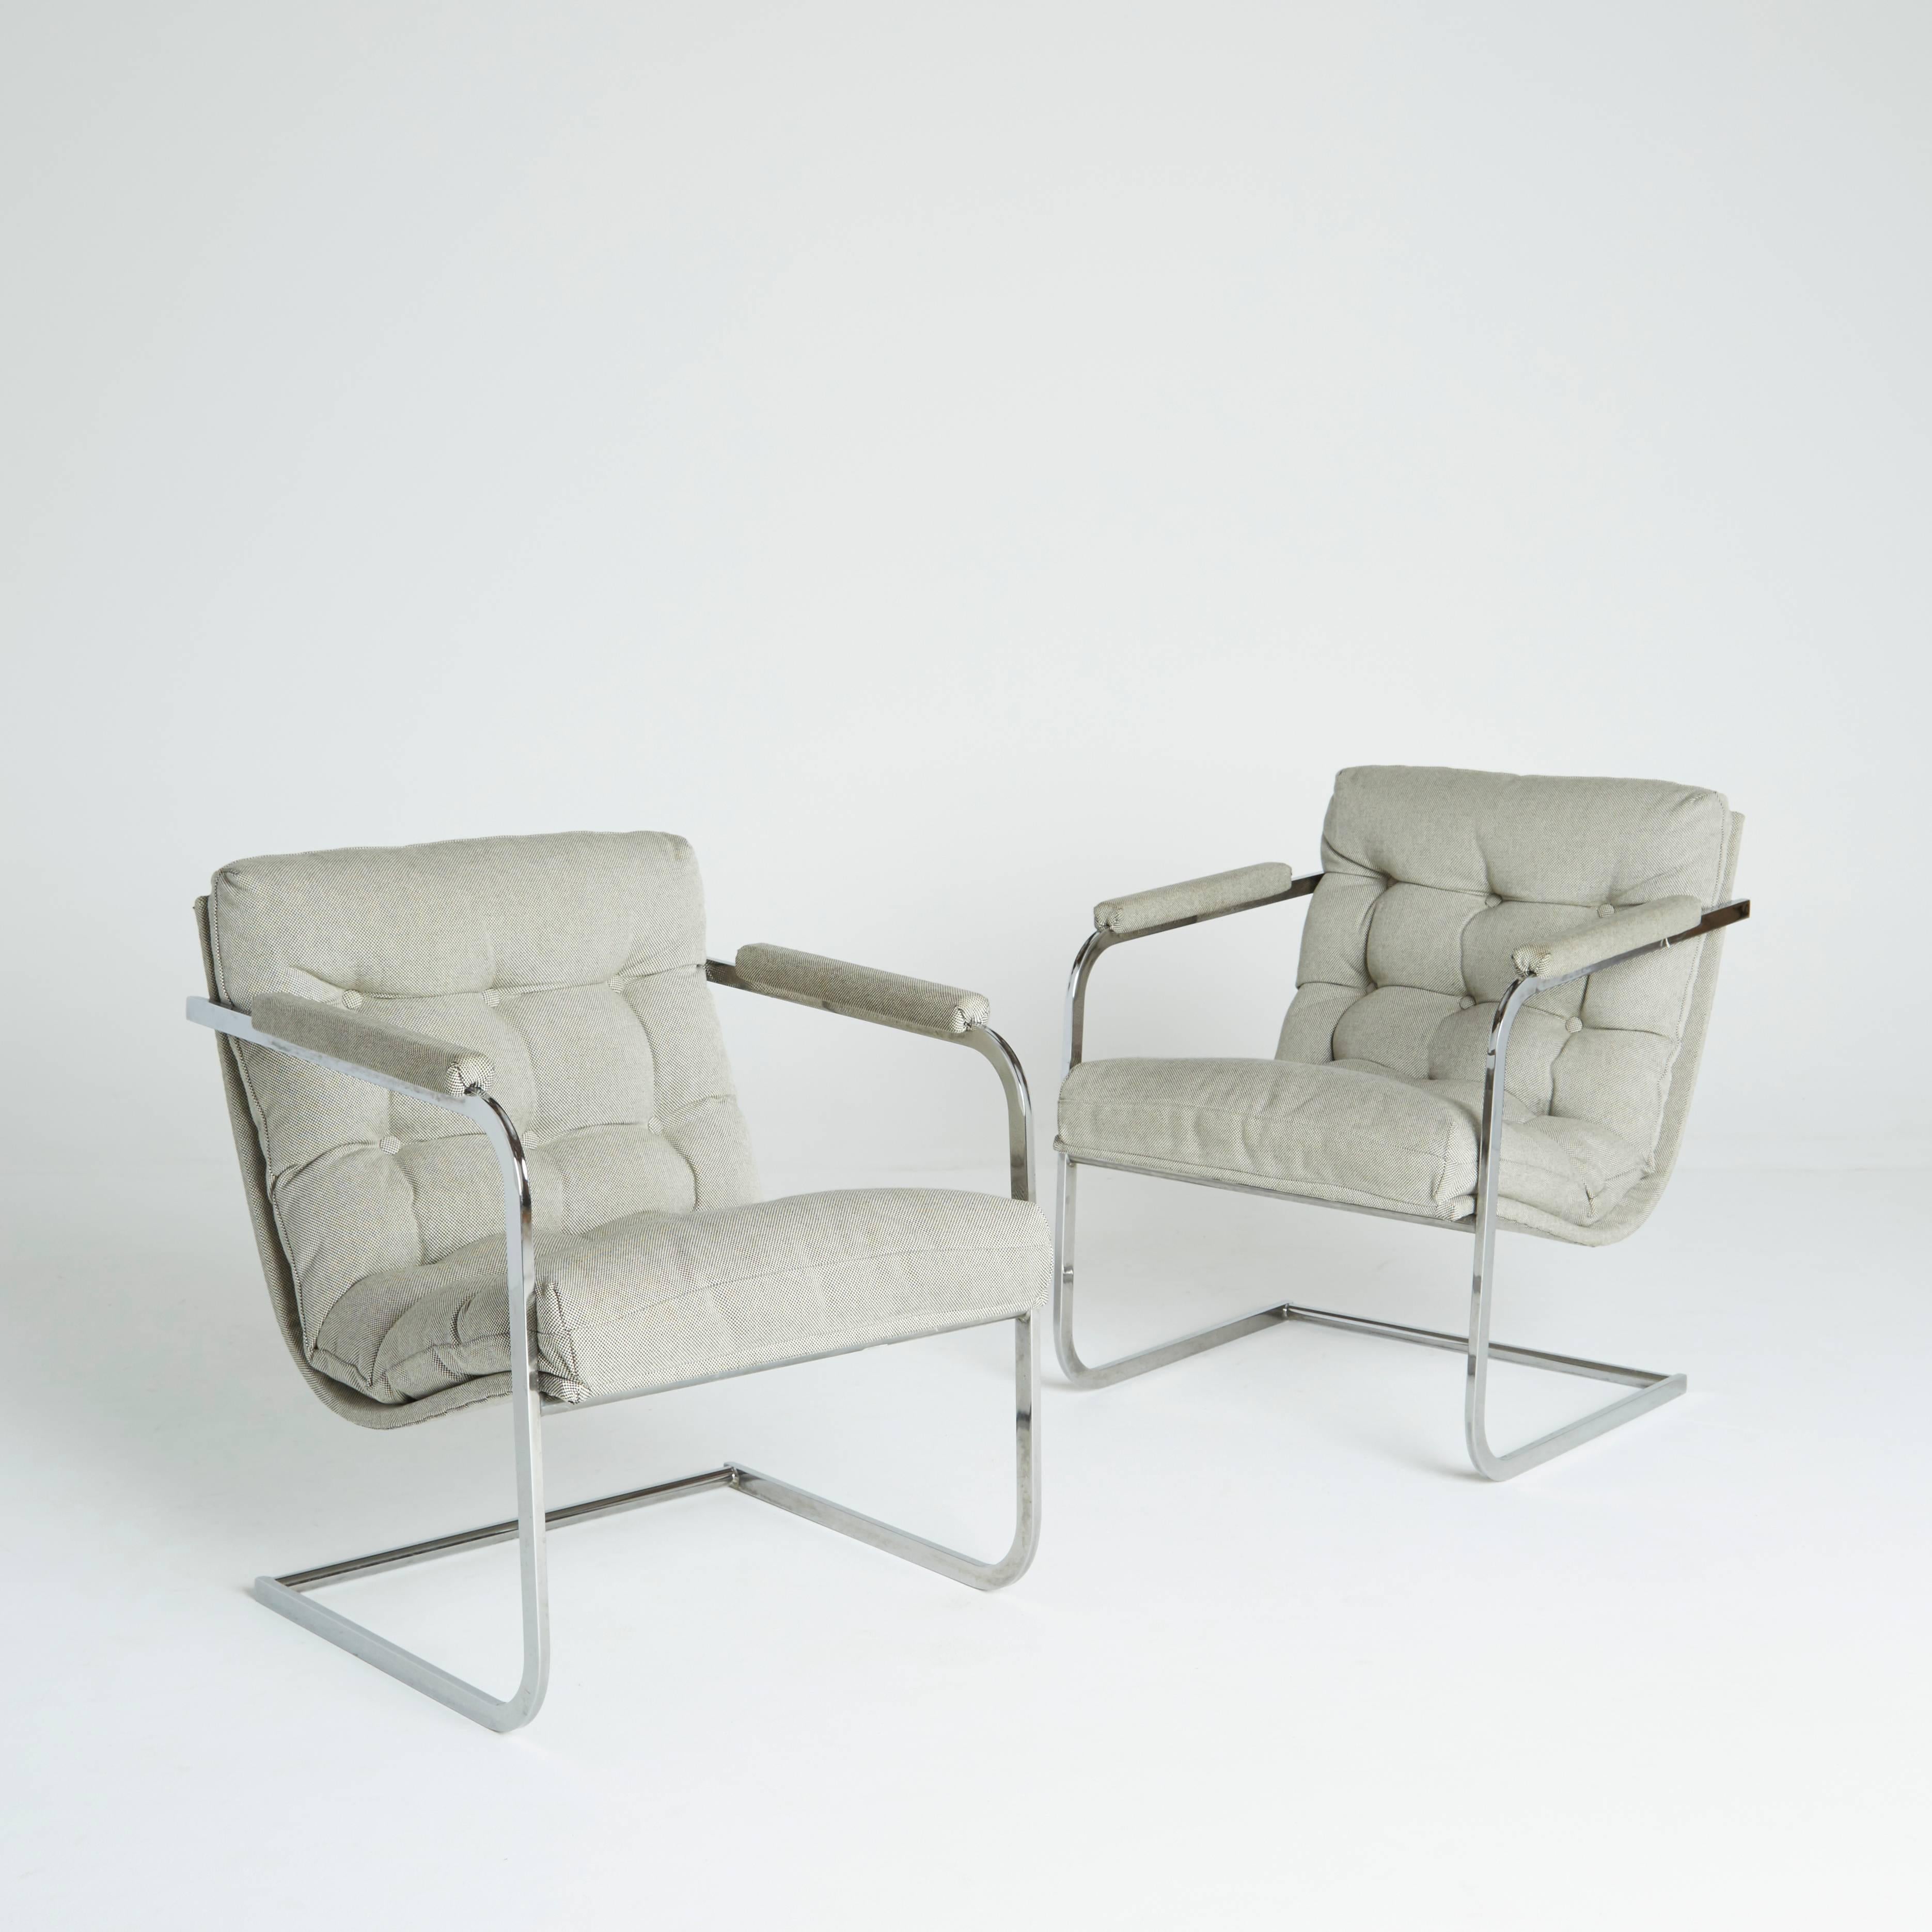 The vibrant tubular chrome frames on this beautiful set are sleek and rounded, creating a cantilevered support. Curving from the backrest into the seat, the chair features one continuous, comfortable cushion. Each armrest has an upholstered cushion